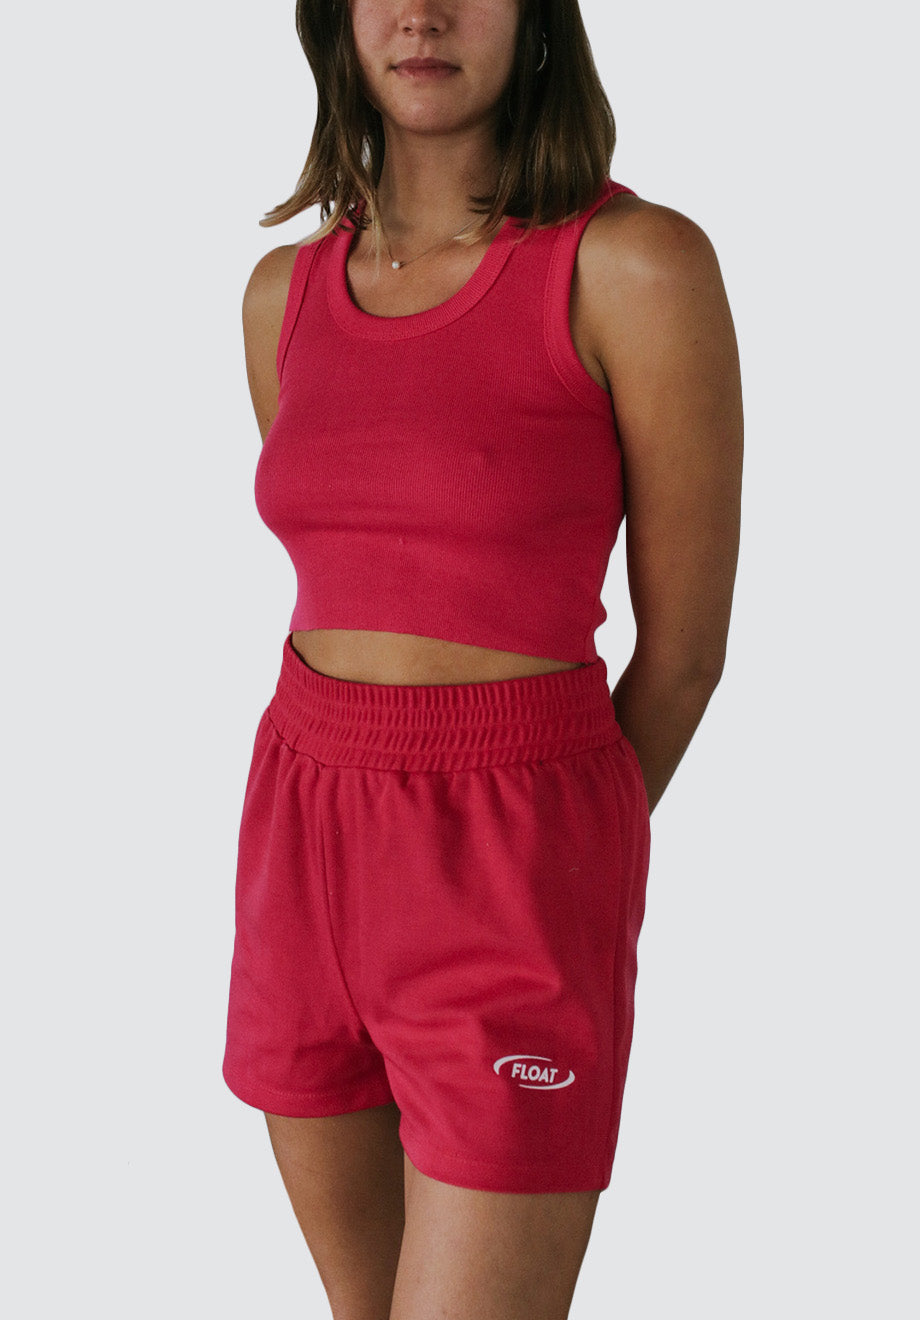 Track Shorts Lacoste | Pink